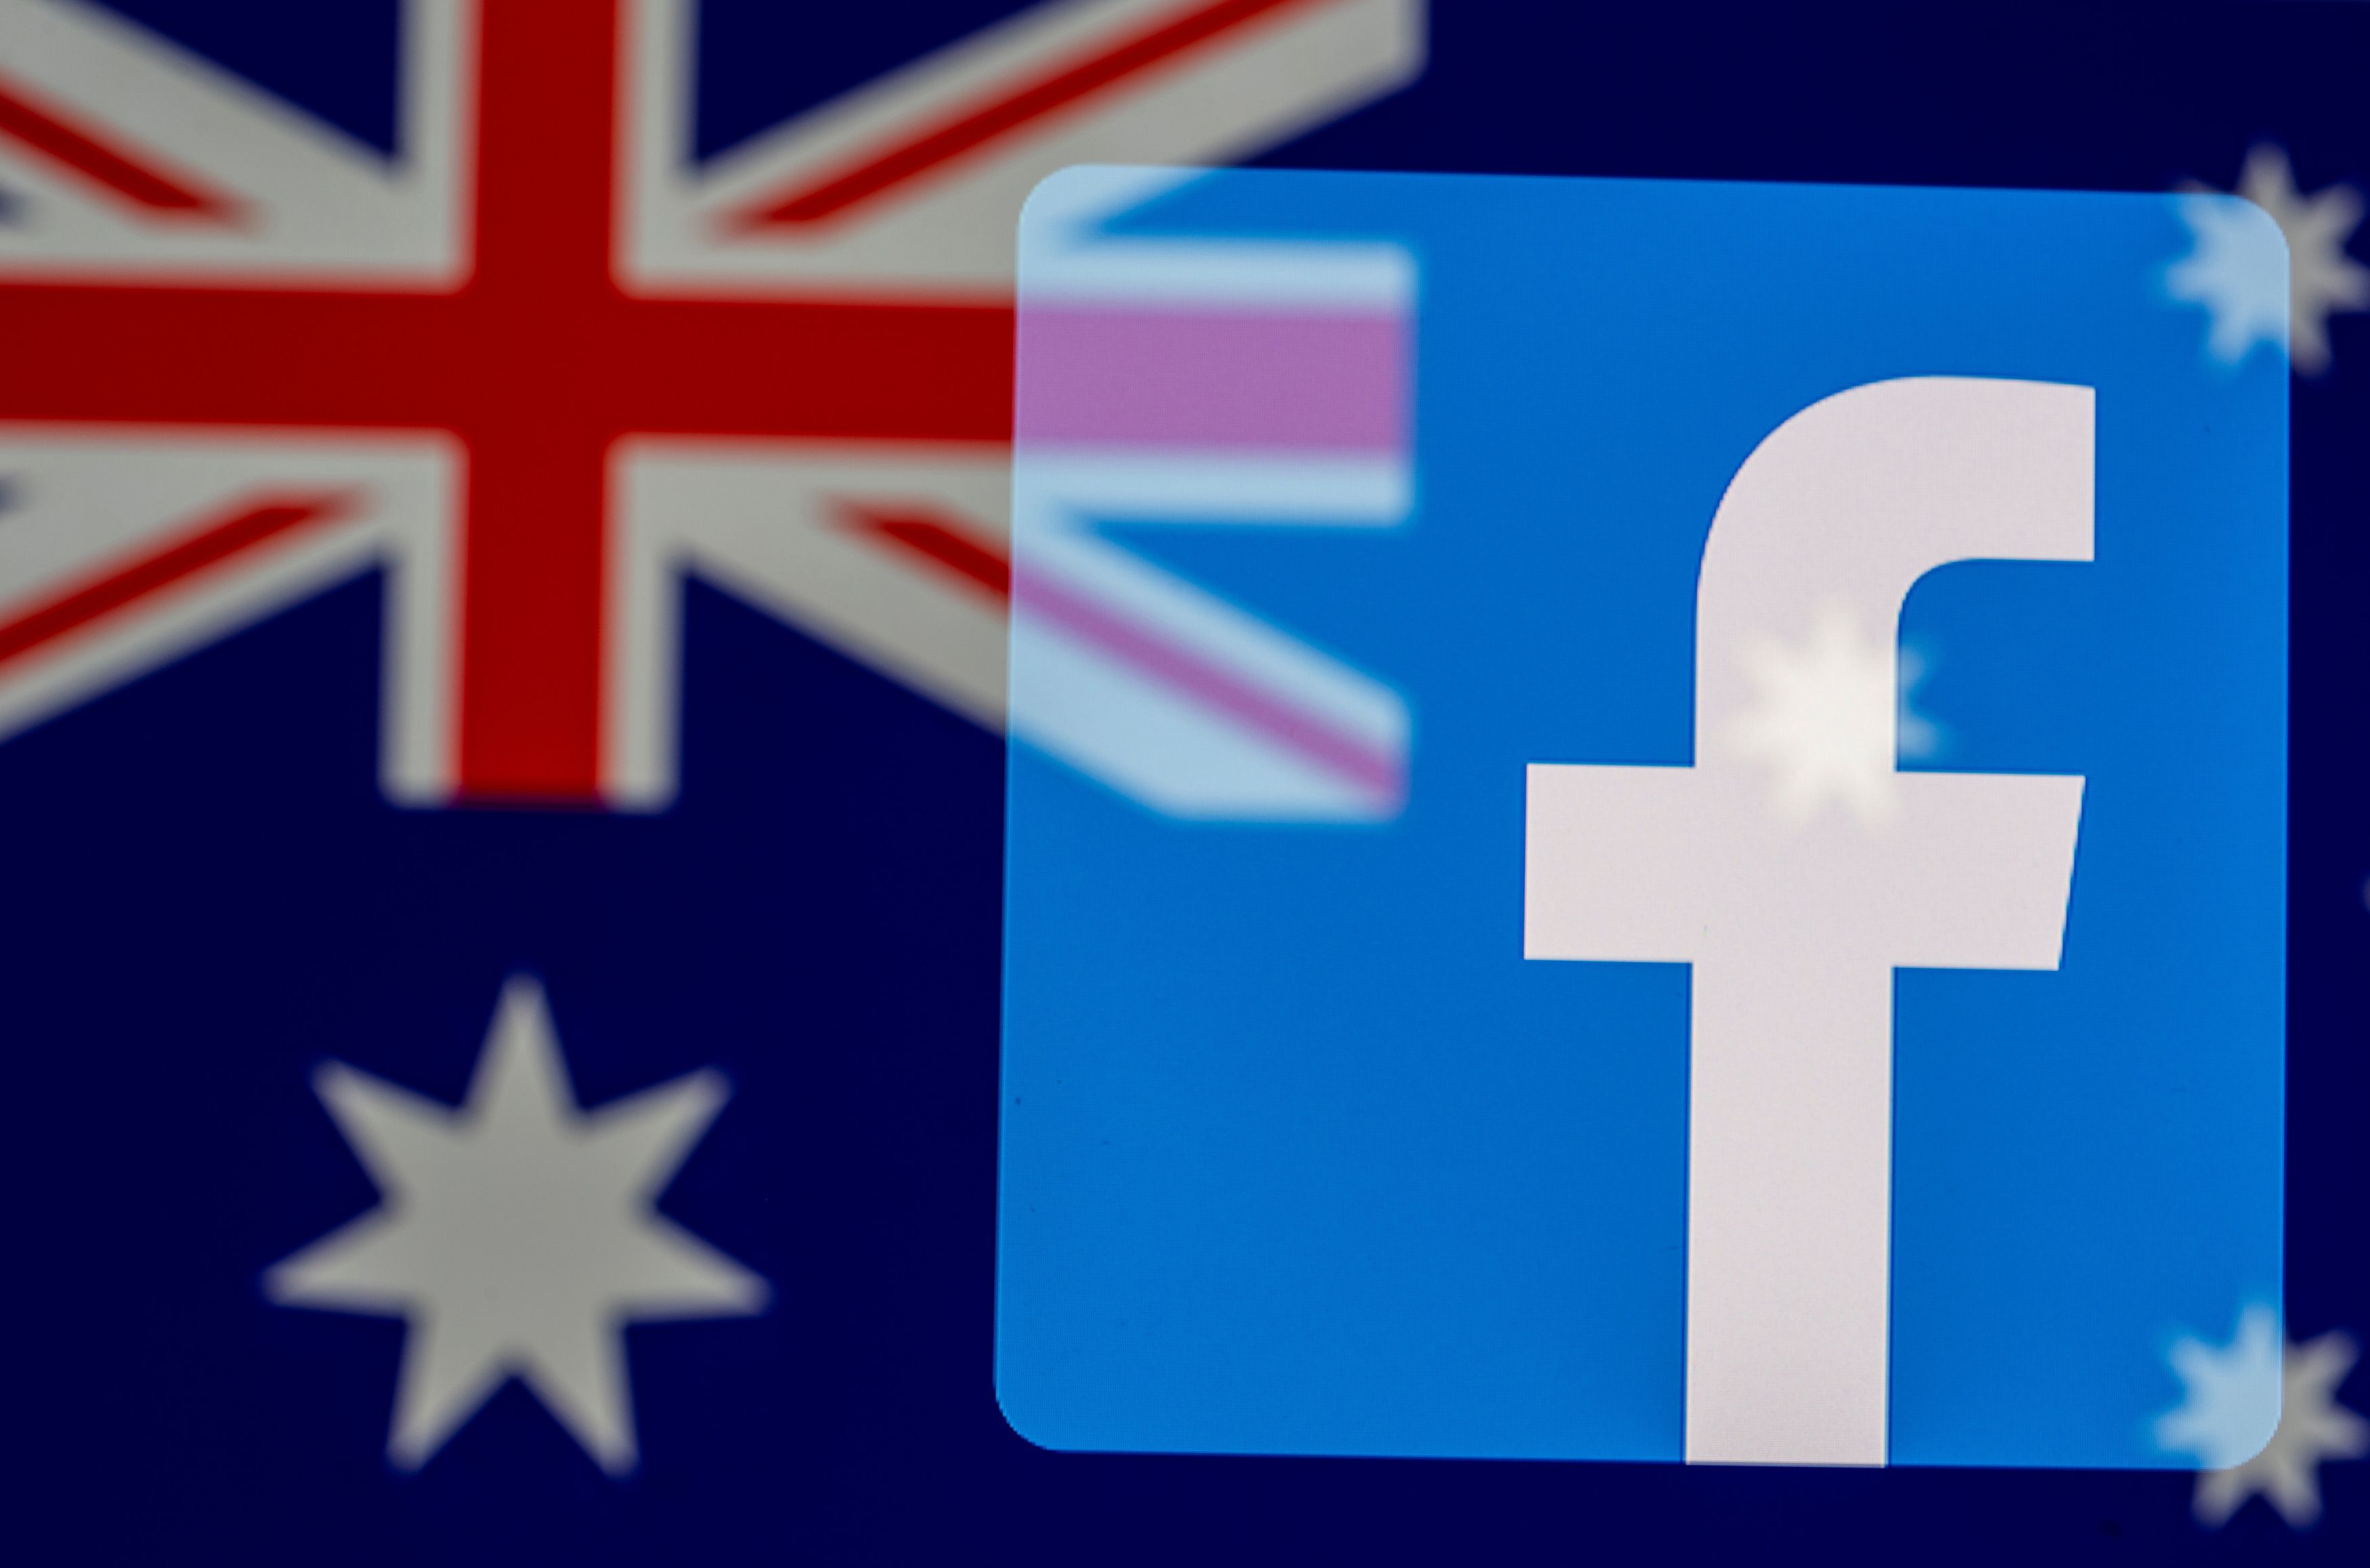 Facebook logo and Australian flag are displayed in this illustration taken